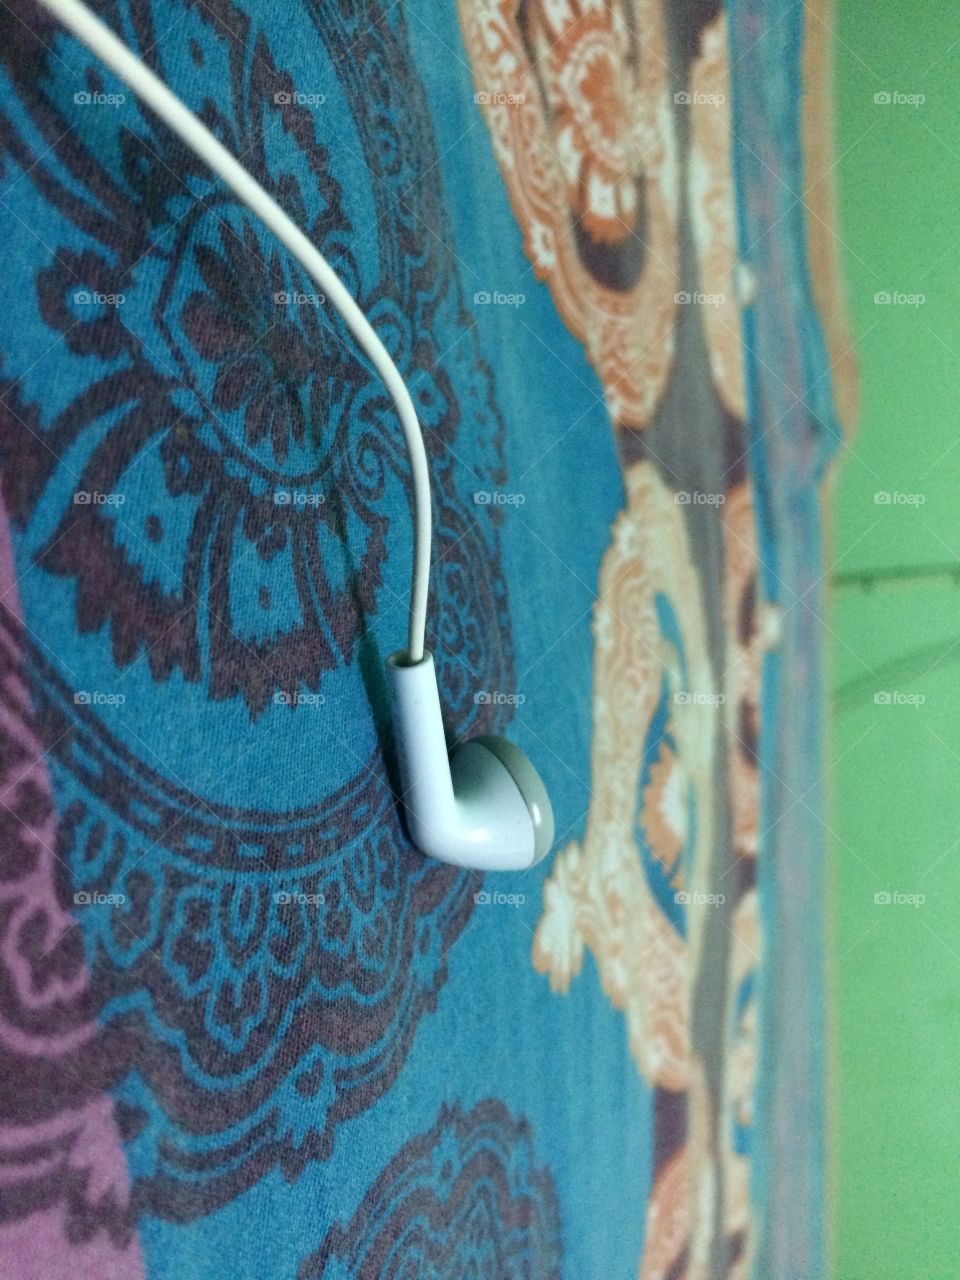 Close up of a white earphone on art sheet